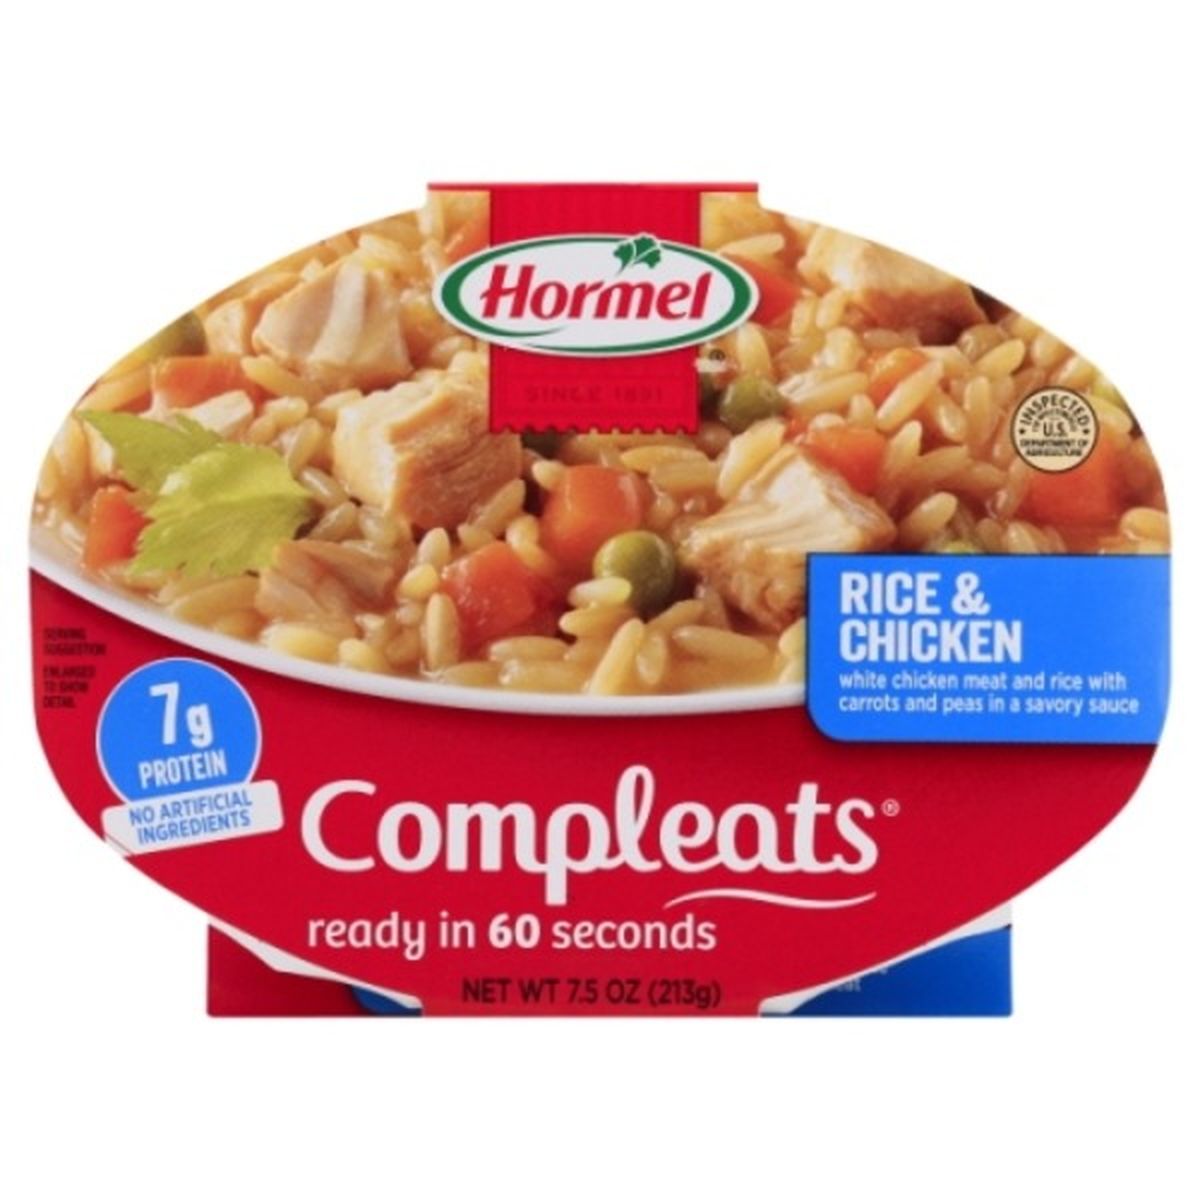 Calories in Hormel Compleats Rice & Chicken